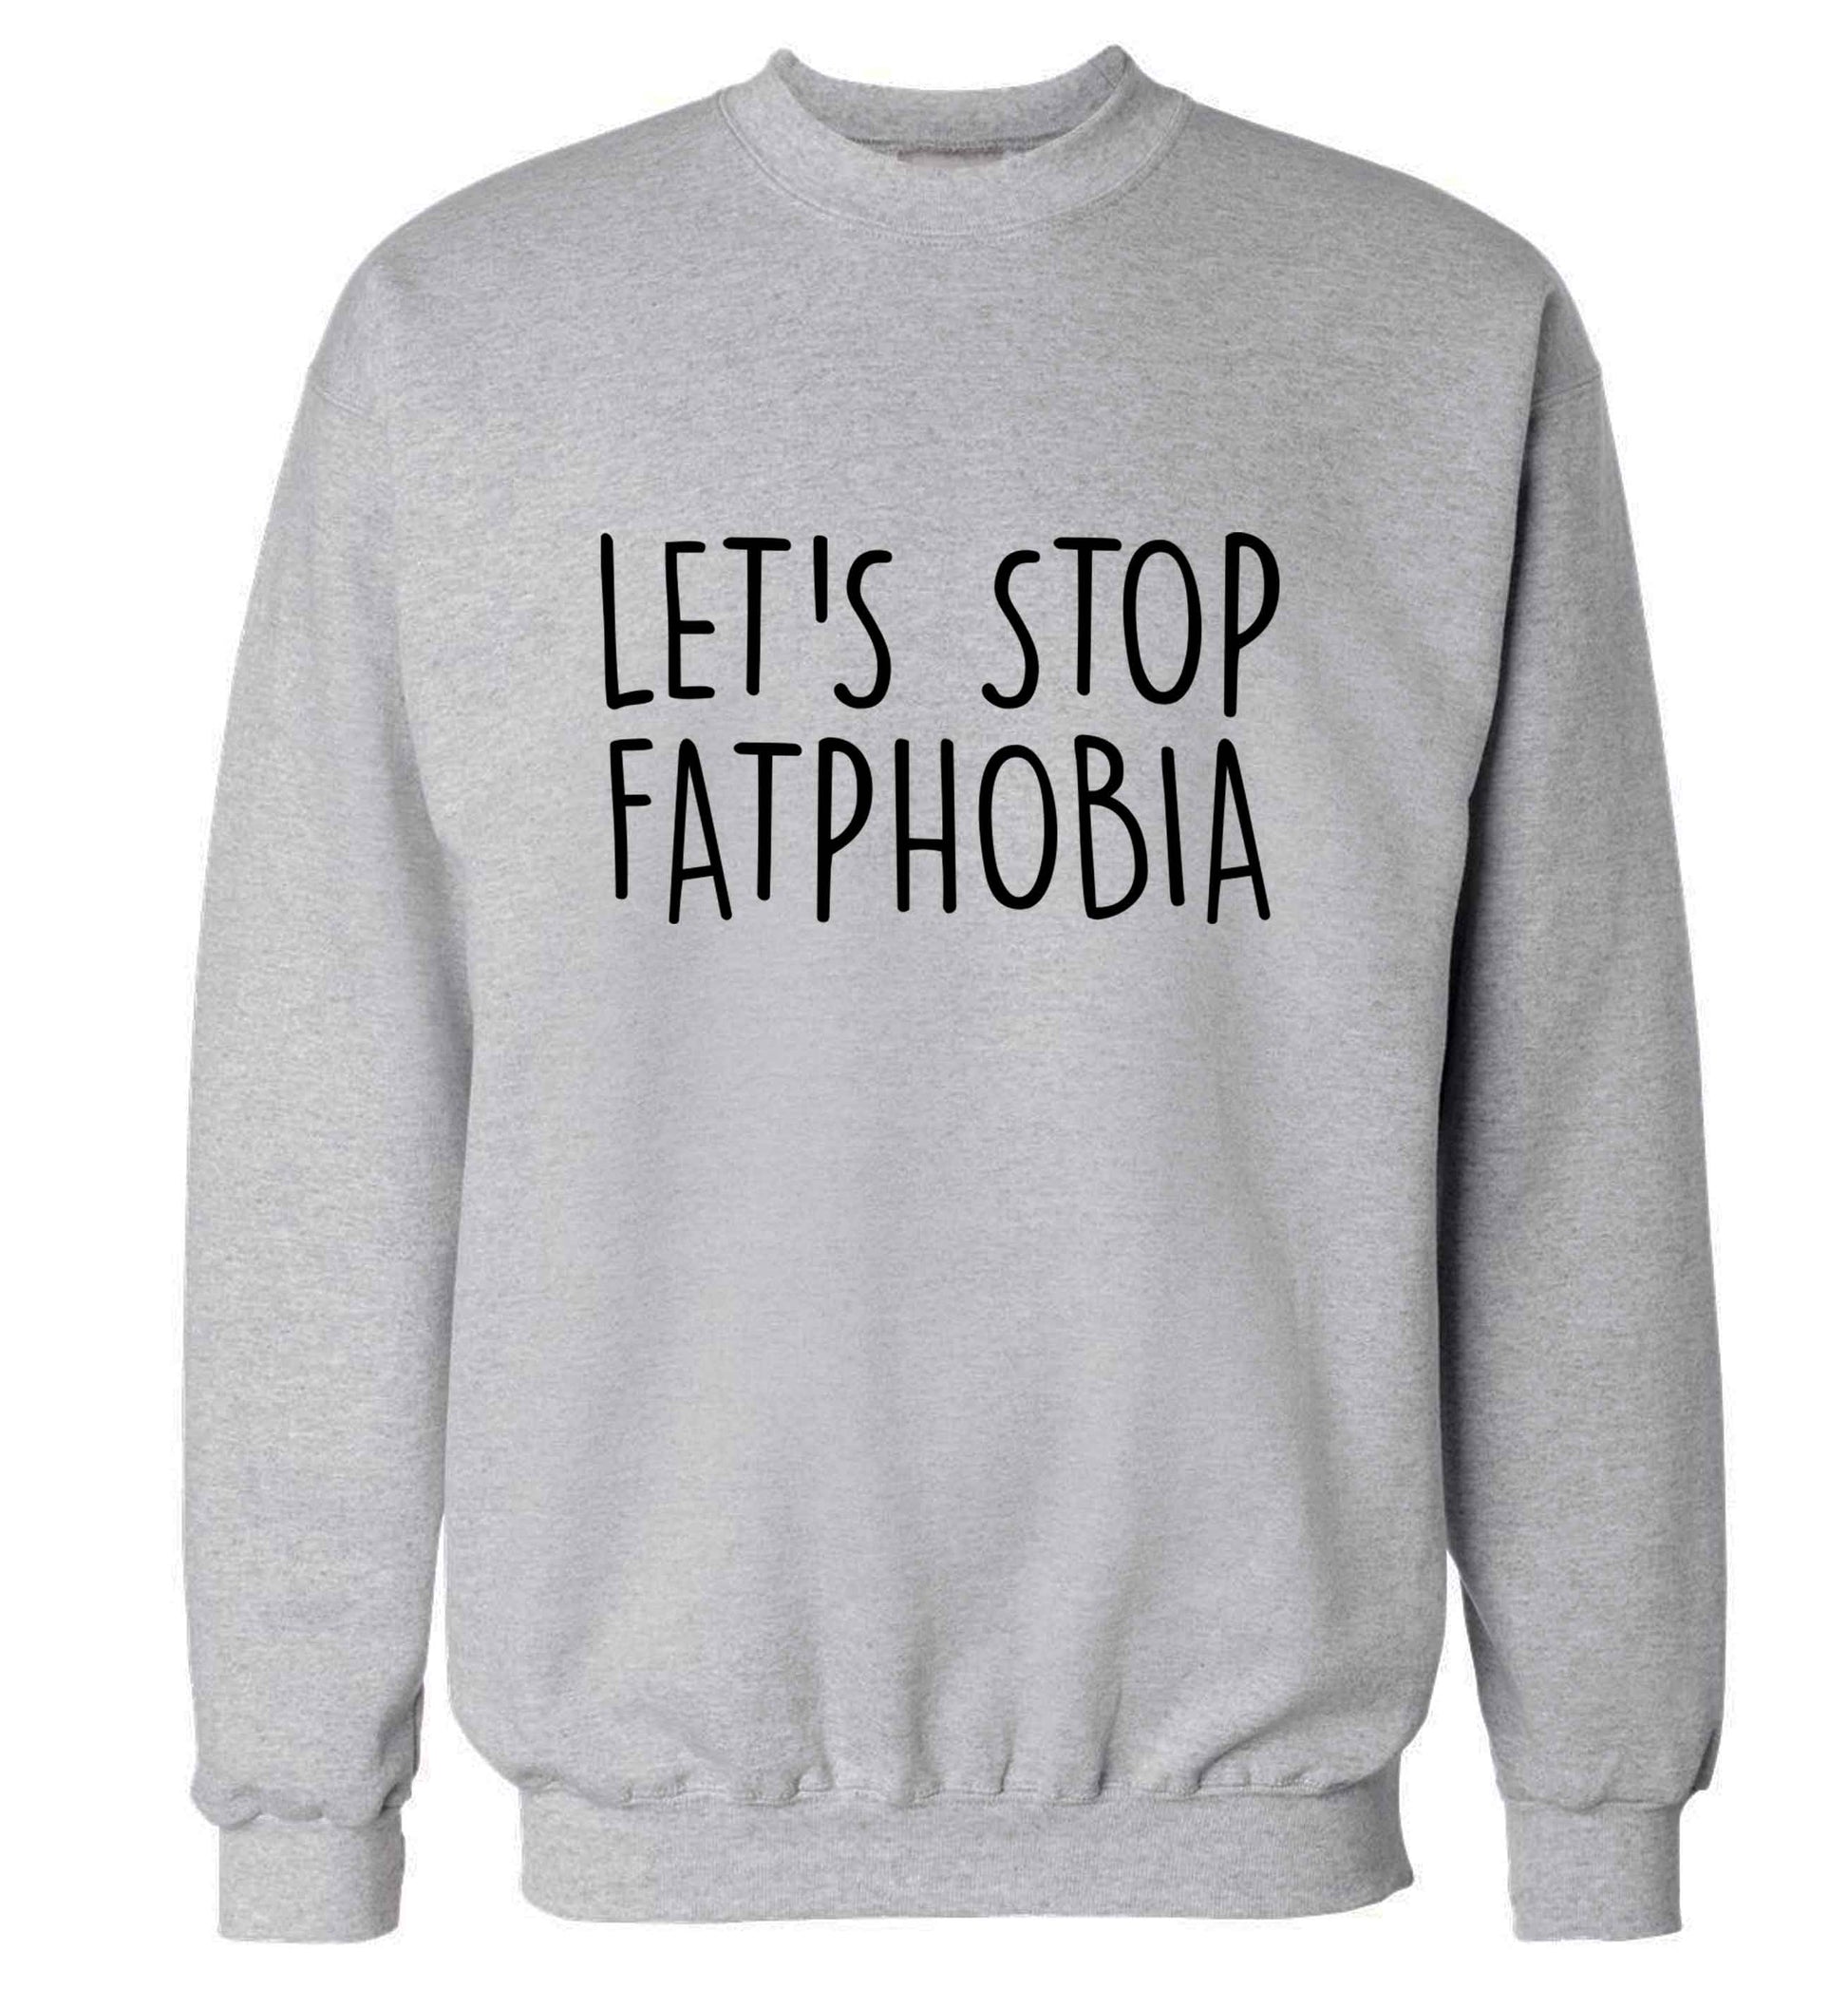 Let's stop fatphobia adult's unisex grey sweater 2XL